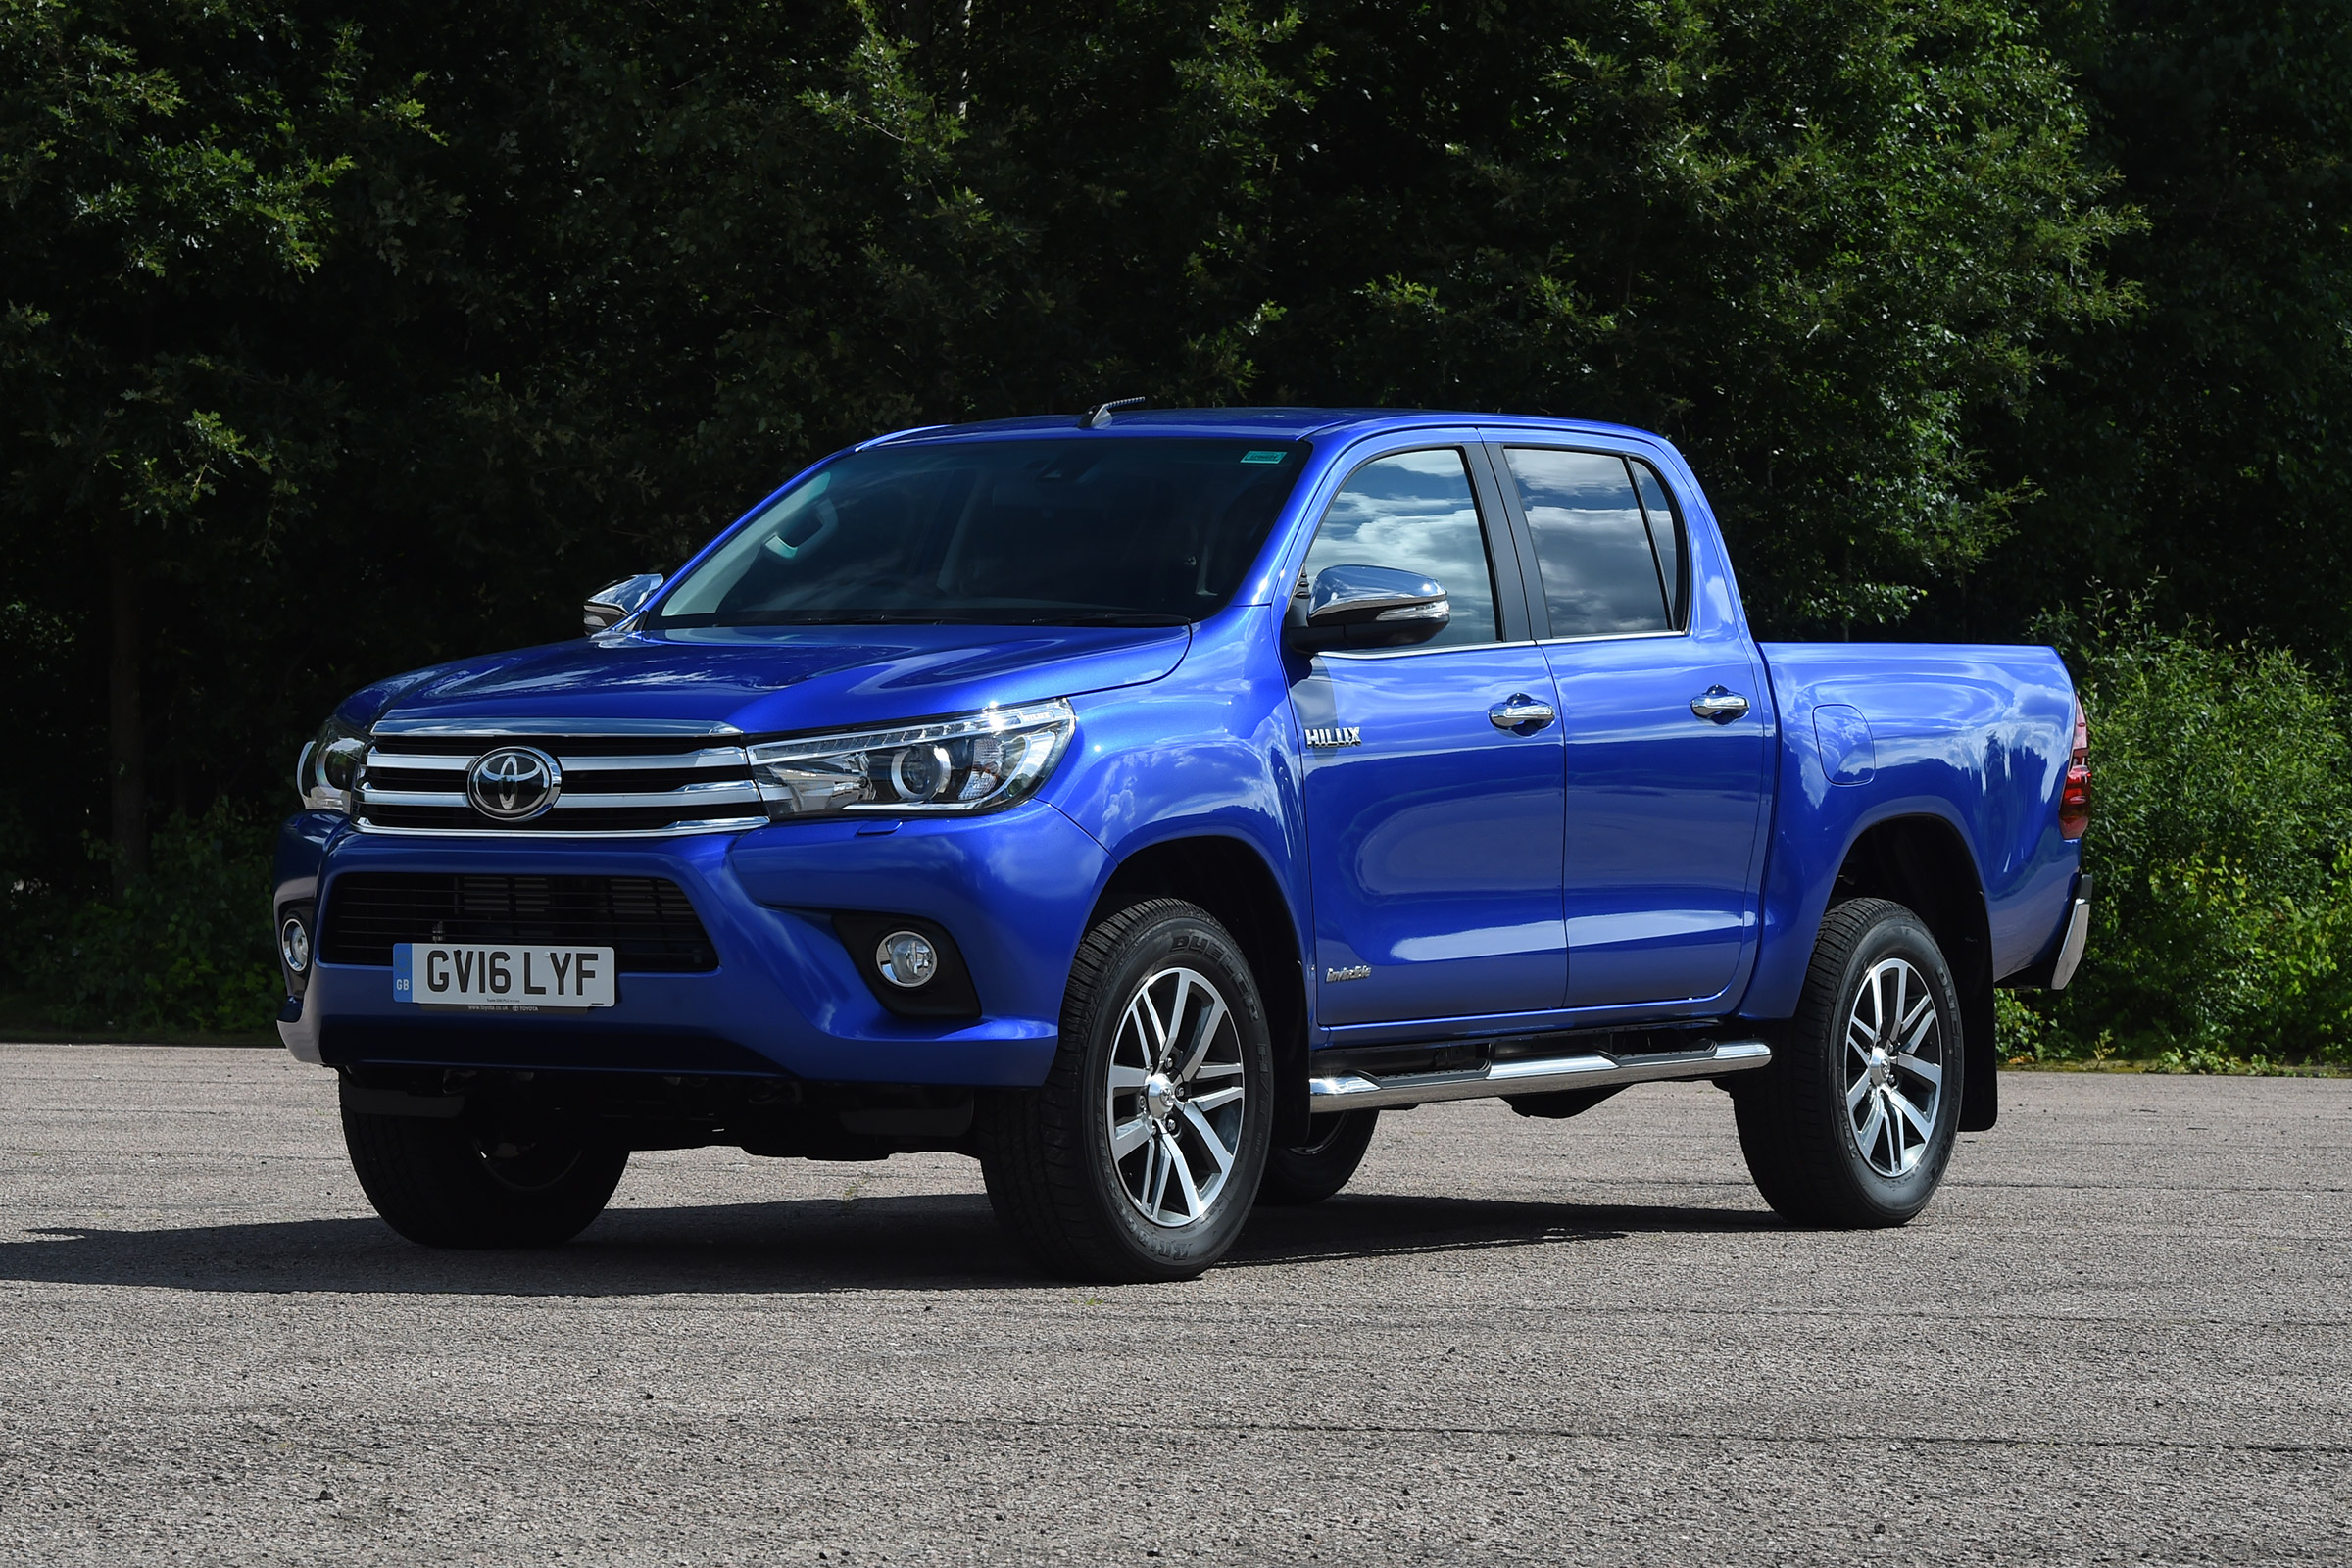 Used Toyota Hilux review | Auto Express